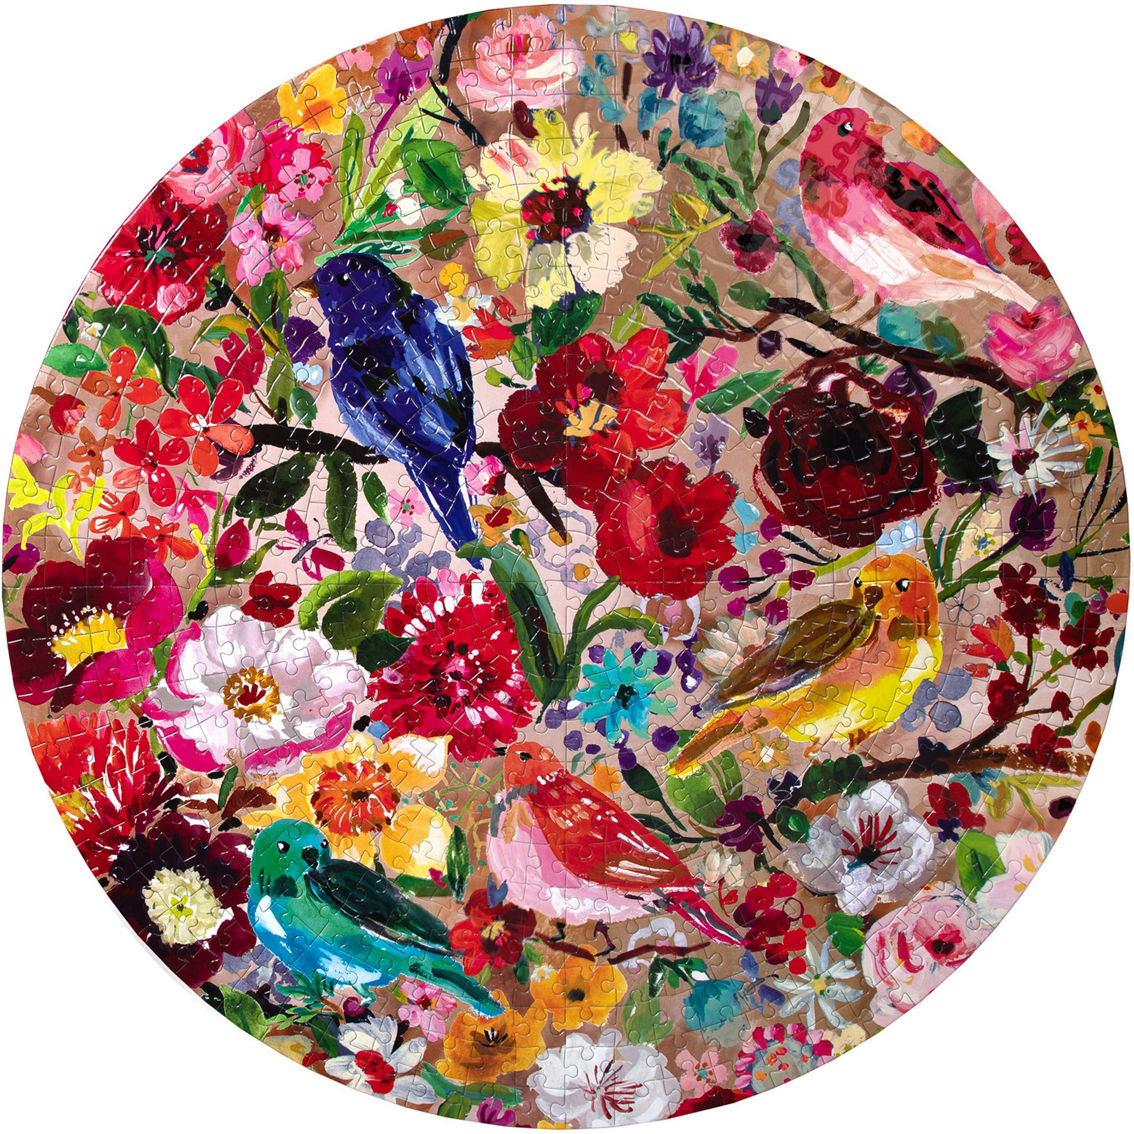 eeBoo Piece and Love Birds & Blossoms 500 Piece Round Jigsaw Puzzle - Image 3 of 3